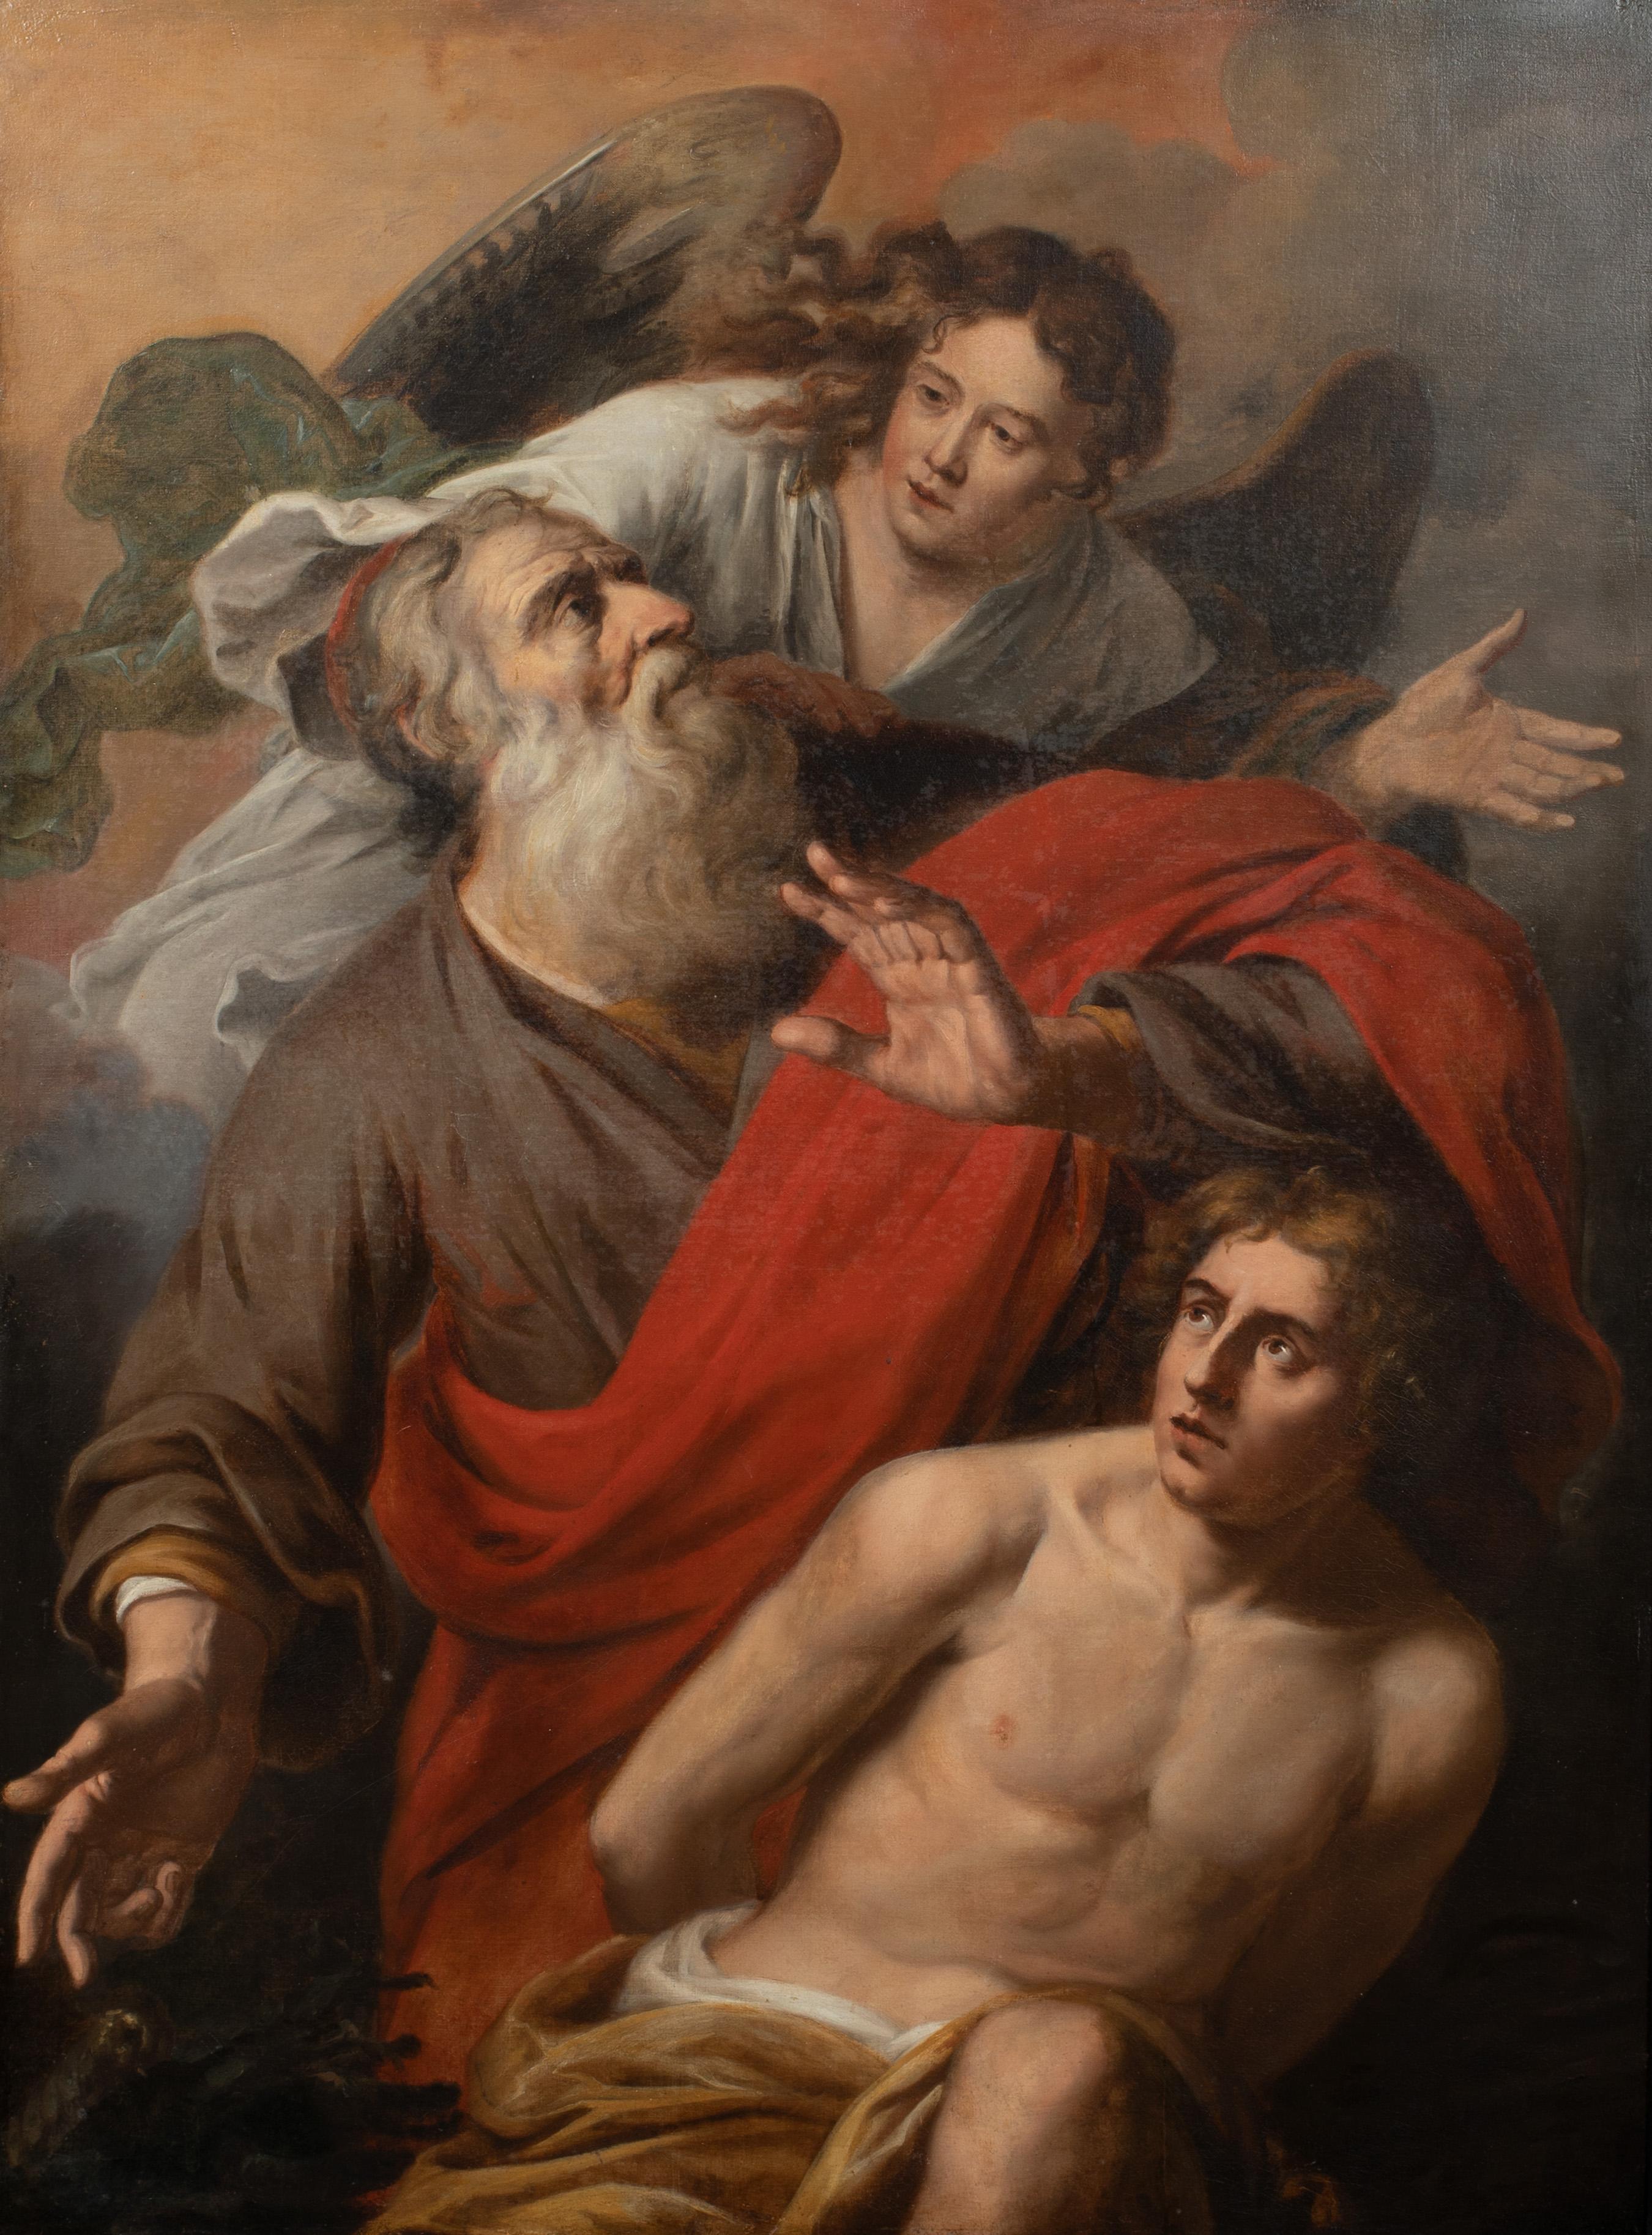 Unknown Figurative Painting - The Sacrifice of Isaac, 17th Century